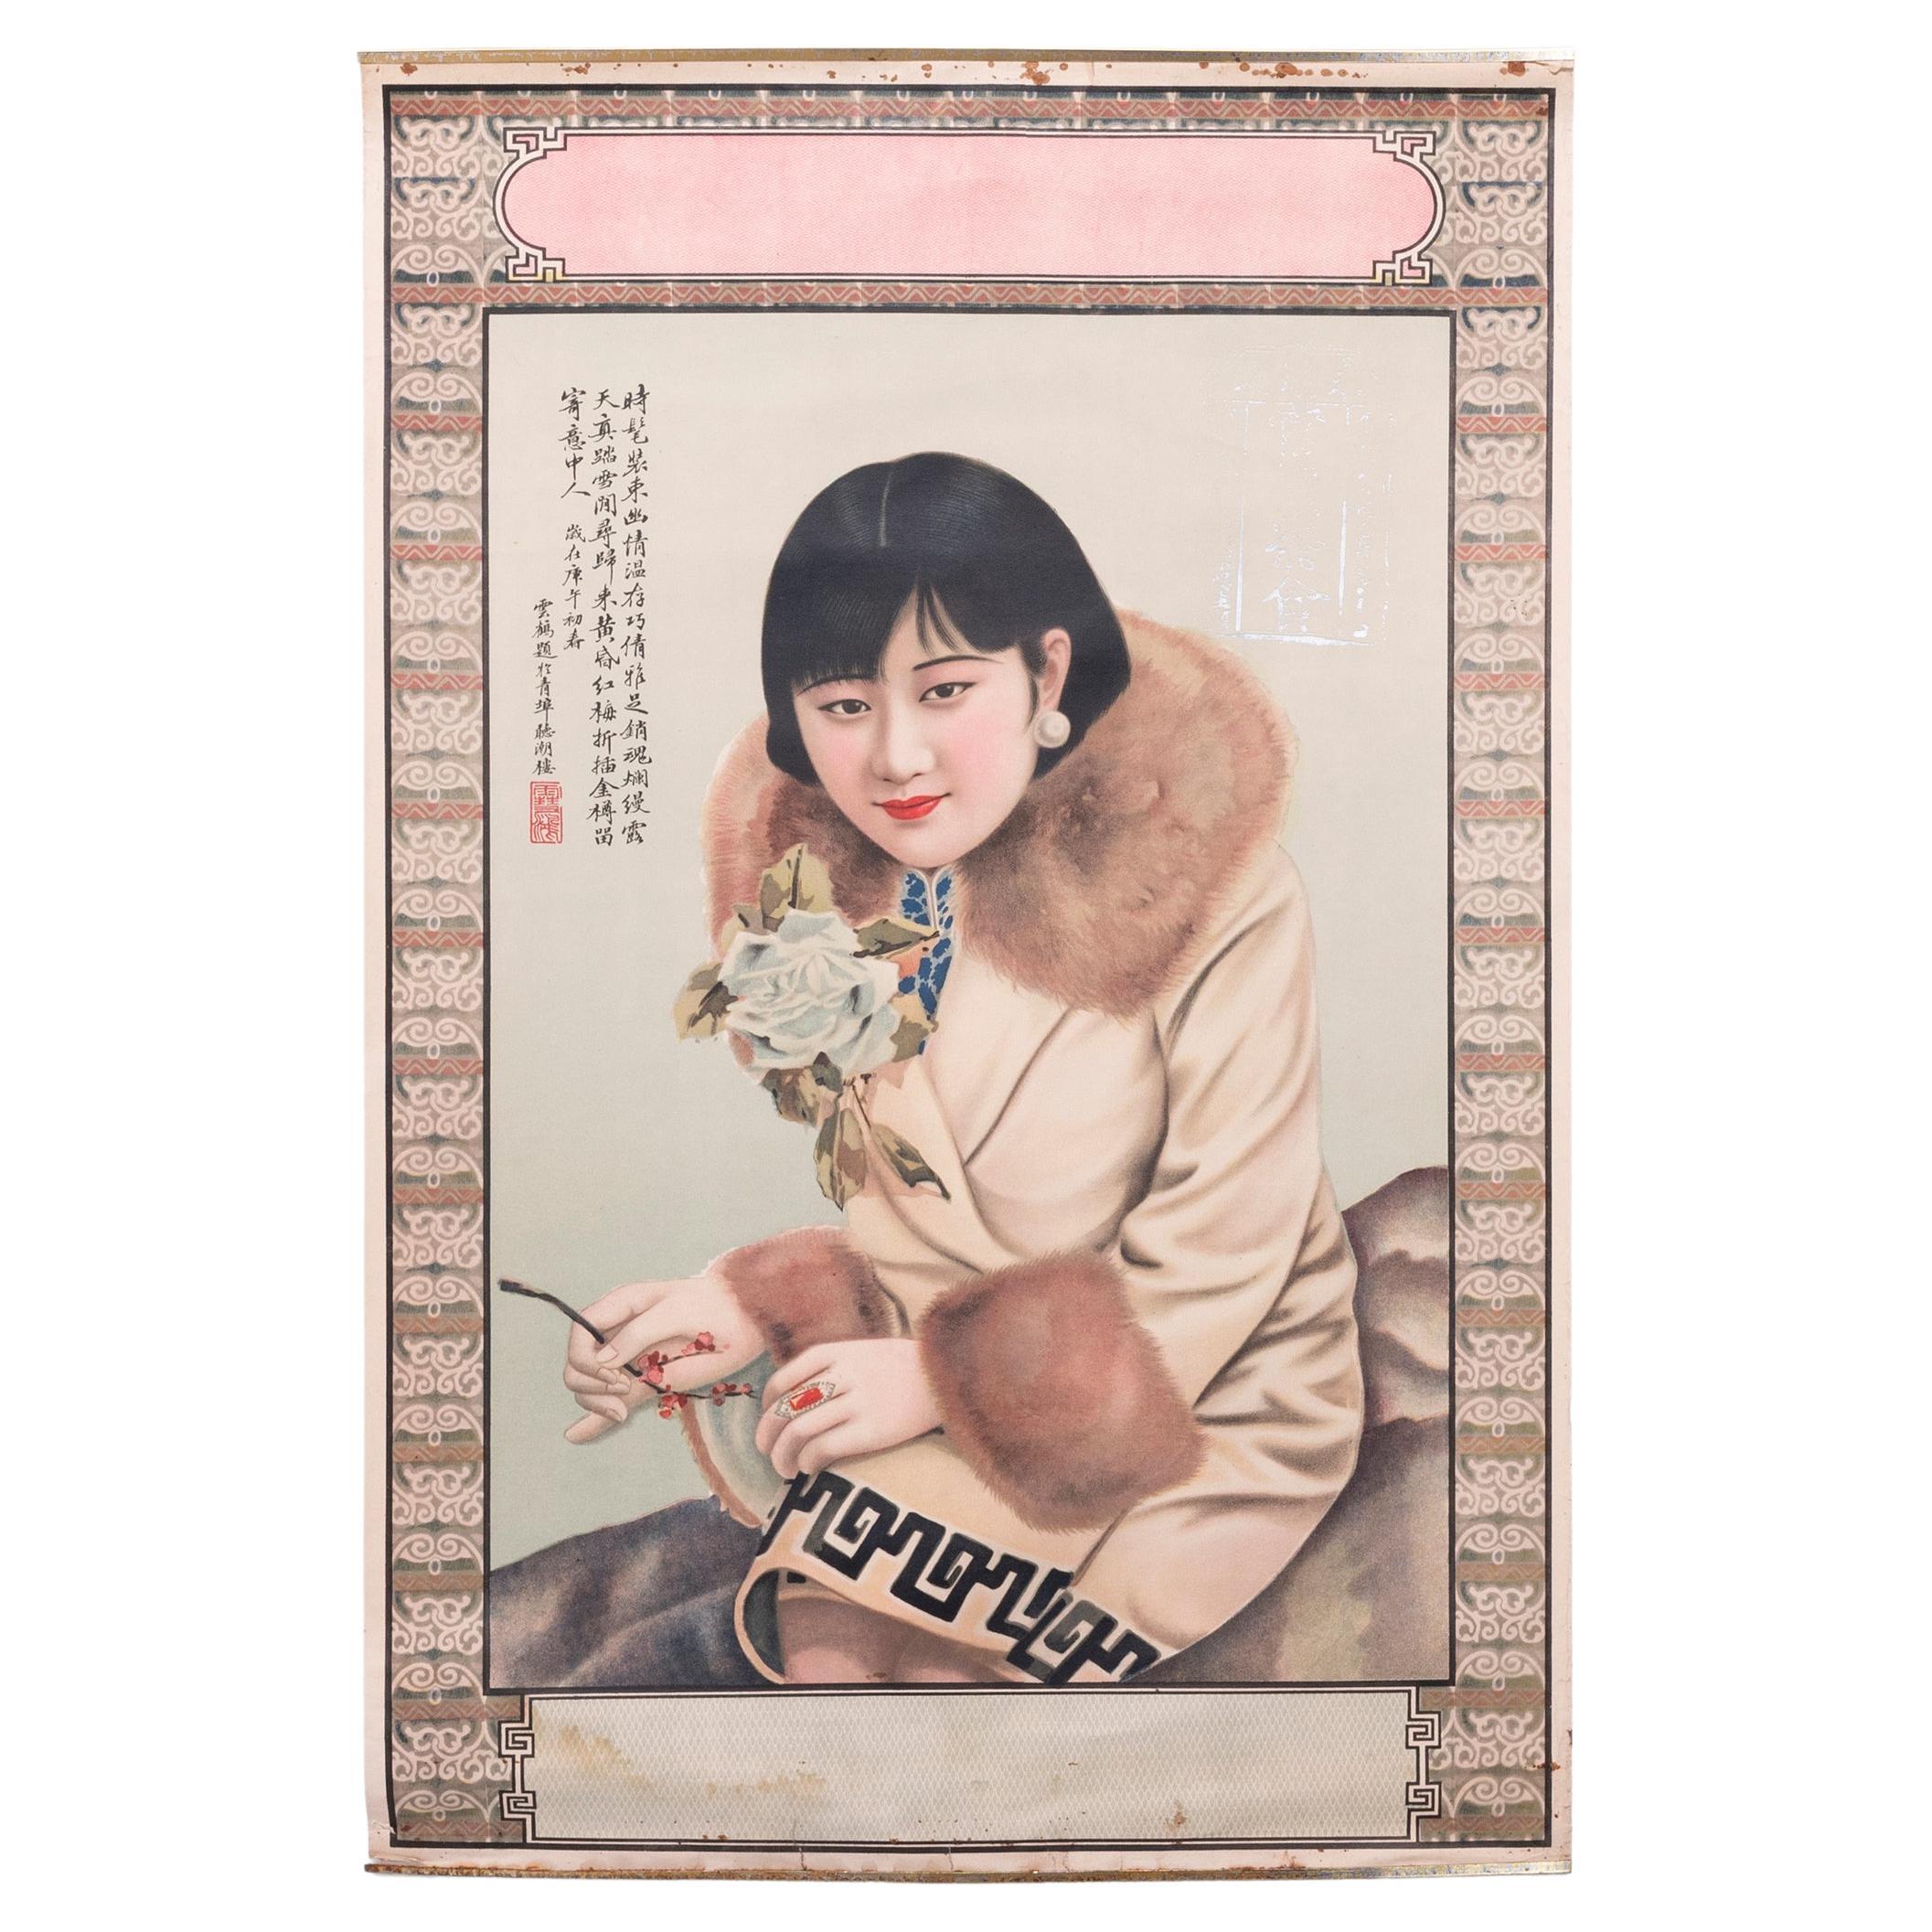 Vintage Chinese Deco Advertisement Poster, c. 1930 For Sale